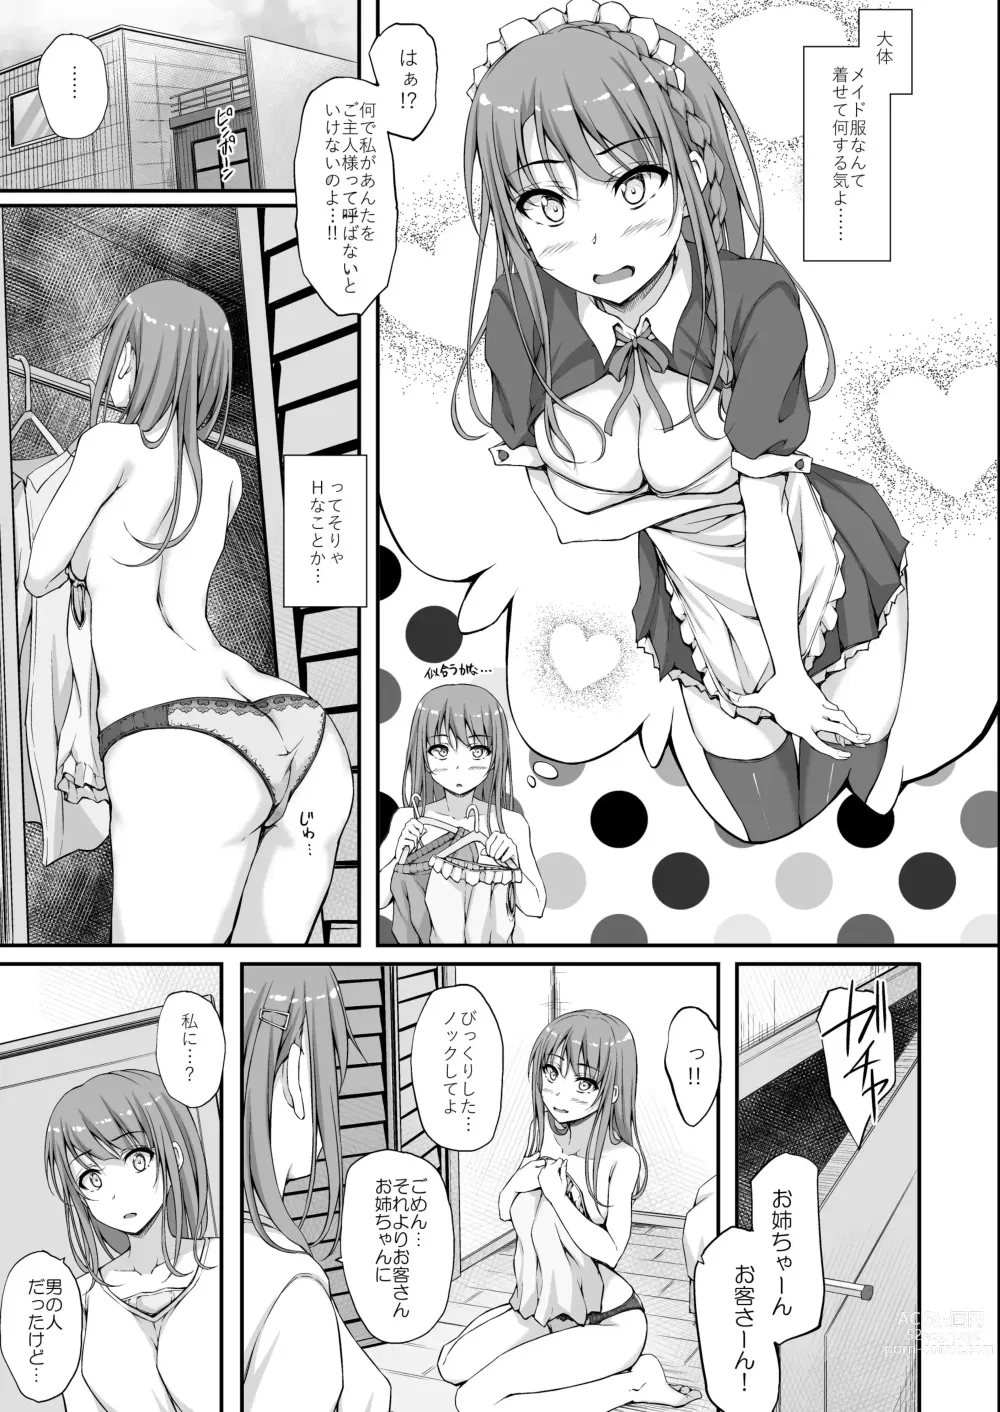 Page 5 of doujinshi Re:Temptation 5